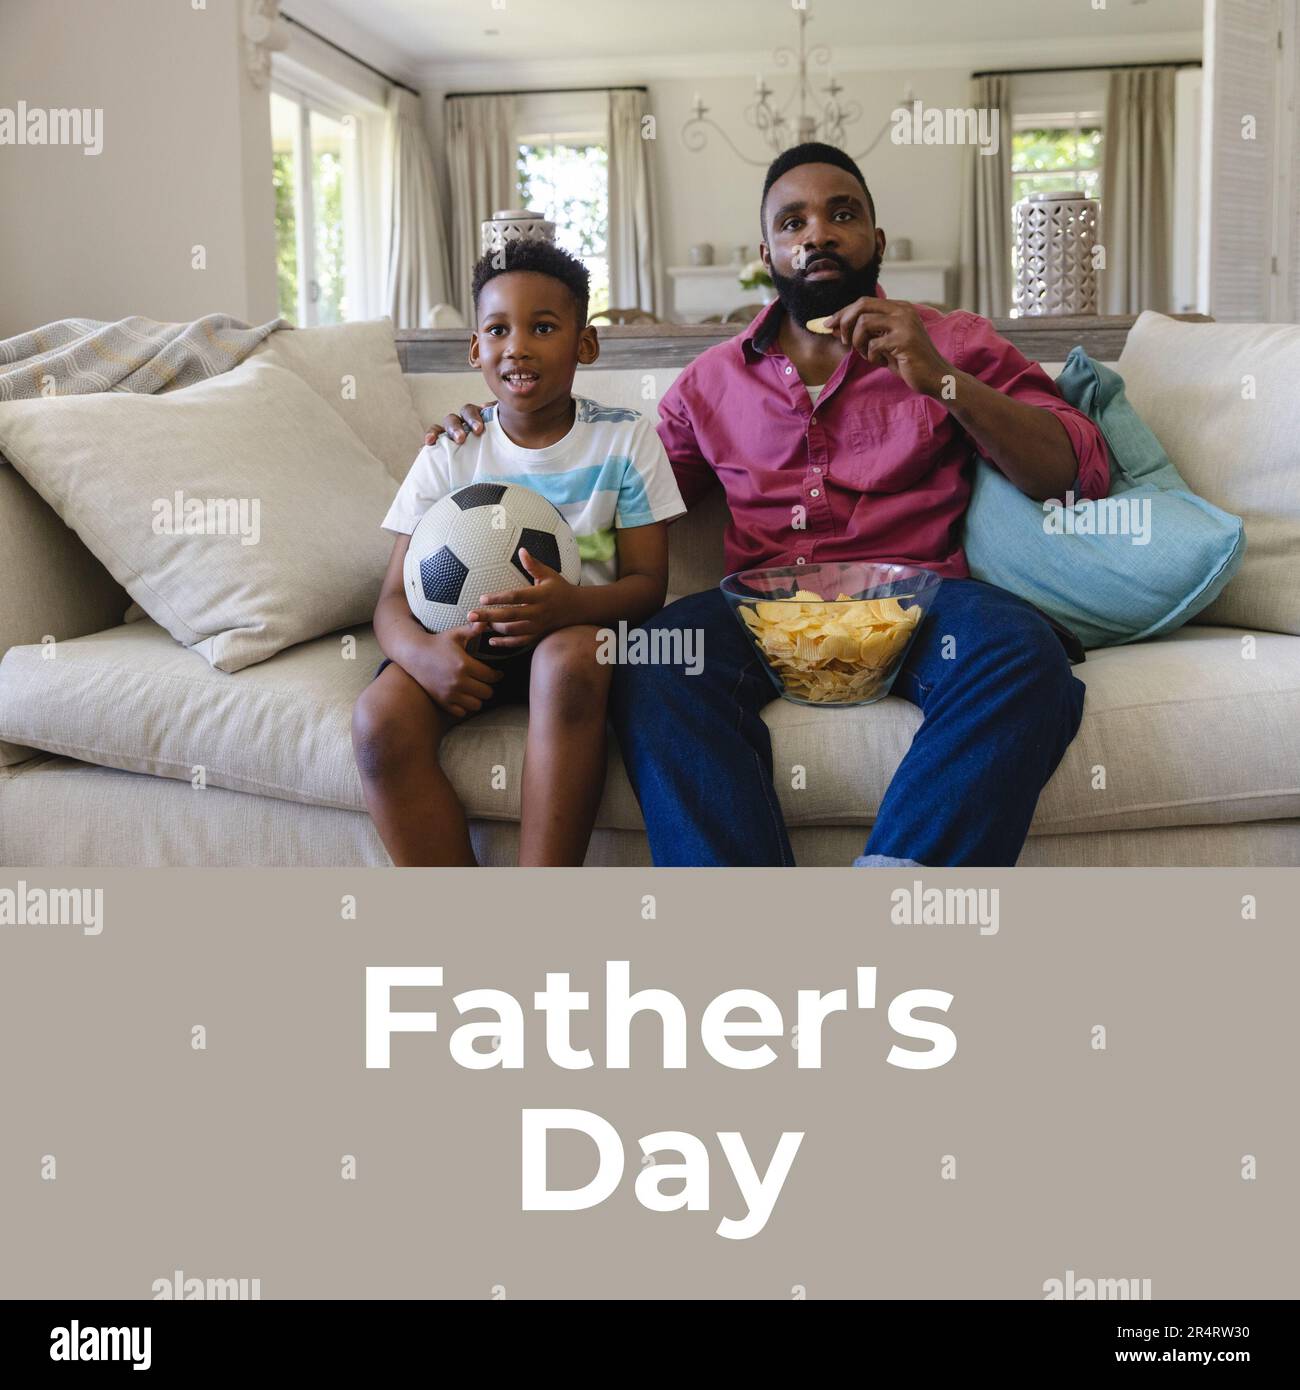 Composition of father's day text over african american man with son watching football Stock Photo